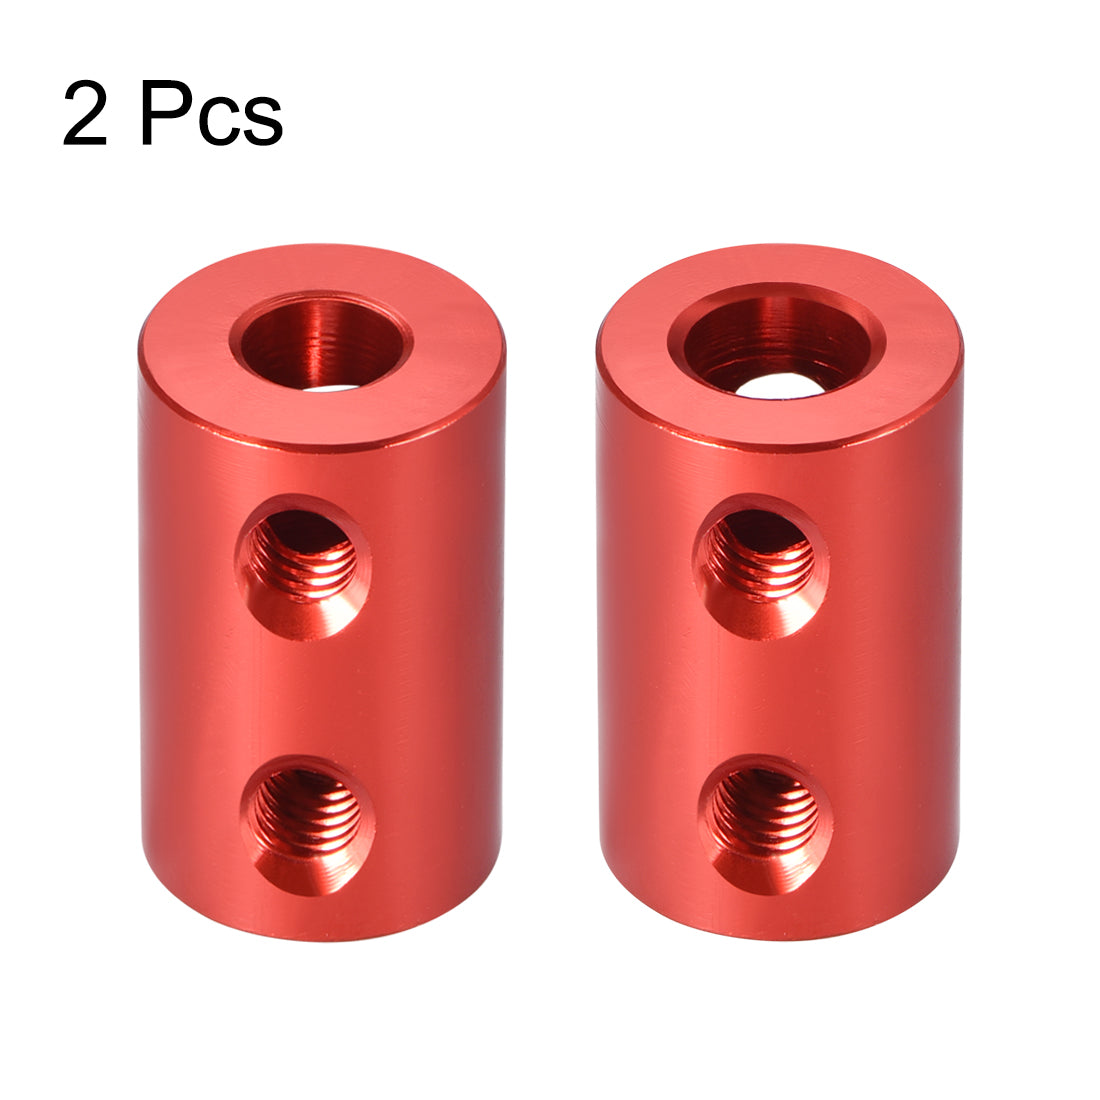 uxcell Uxcell Shaft Coupling 5mm to 6mm Bore L20xD12 Robot Motor Wheel Rigid Coupler Connector Red 2 PCS